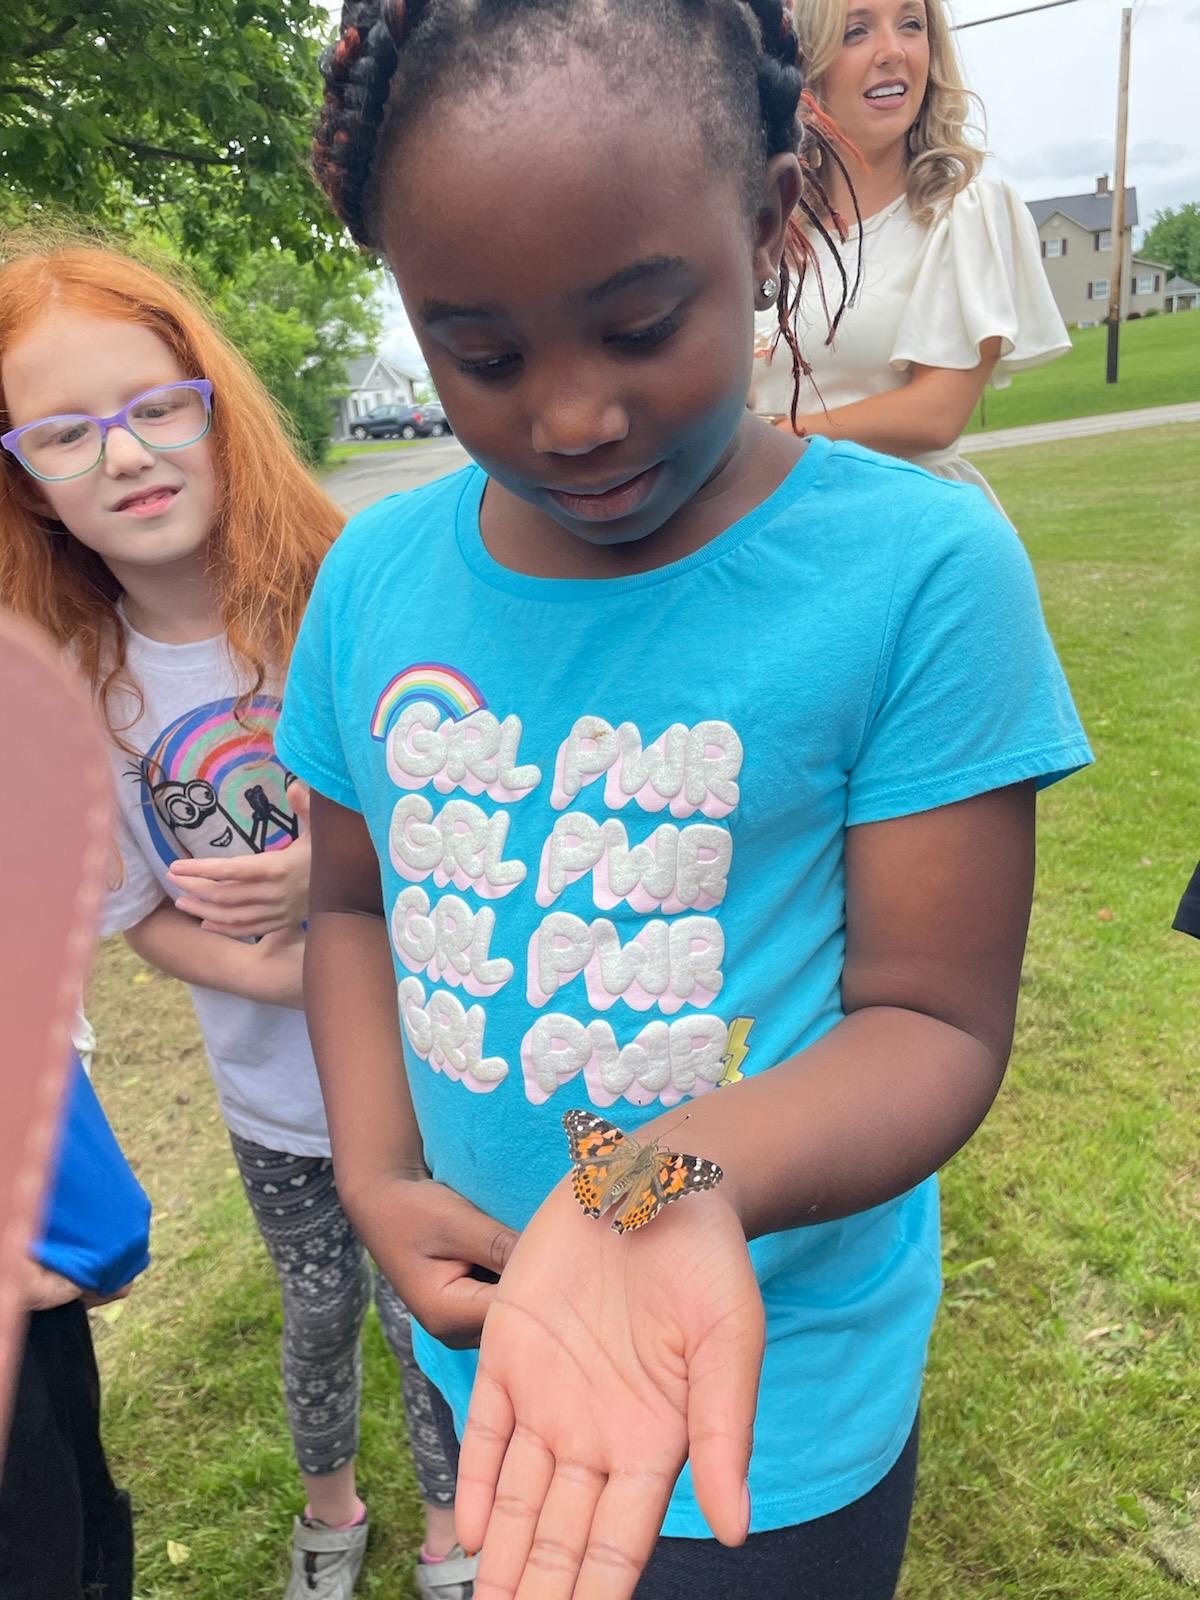 Chinonye Ulasi observes the butterfly resting on her palm